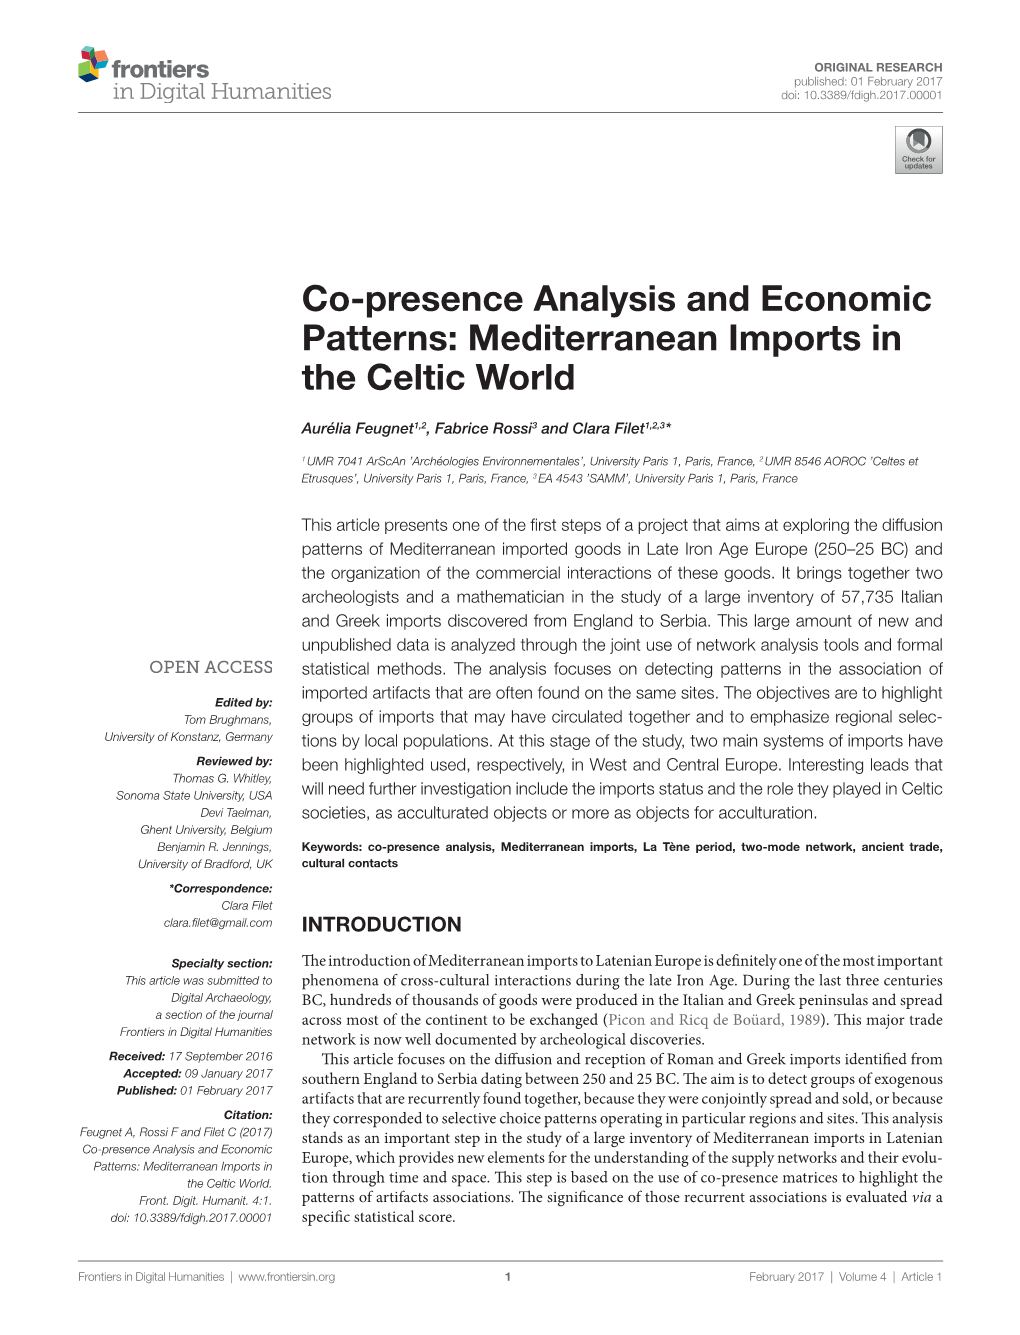 Co-Presence Analysis and Economic Patterns: Mediterranean Imports in the Celtic World